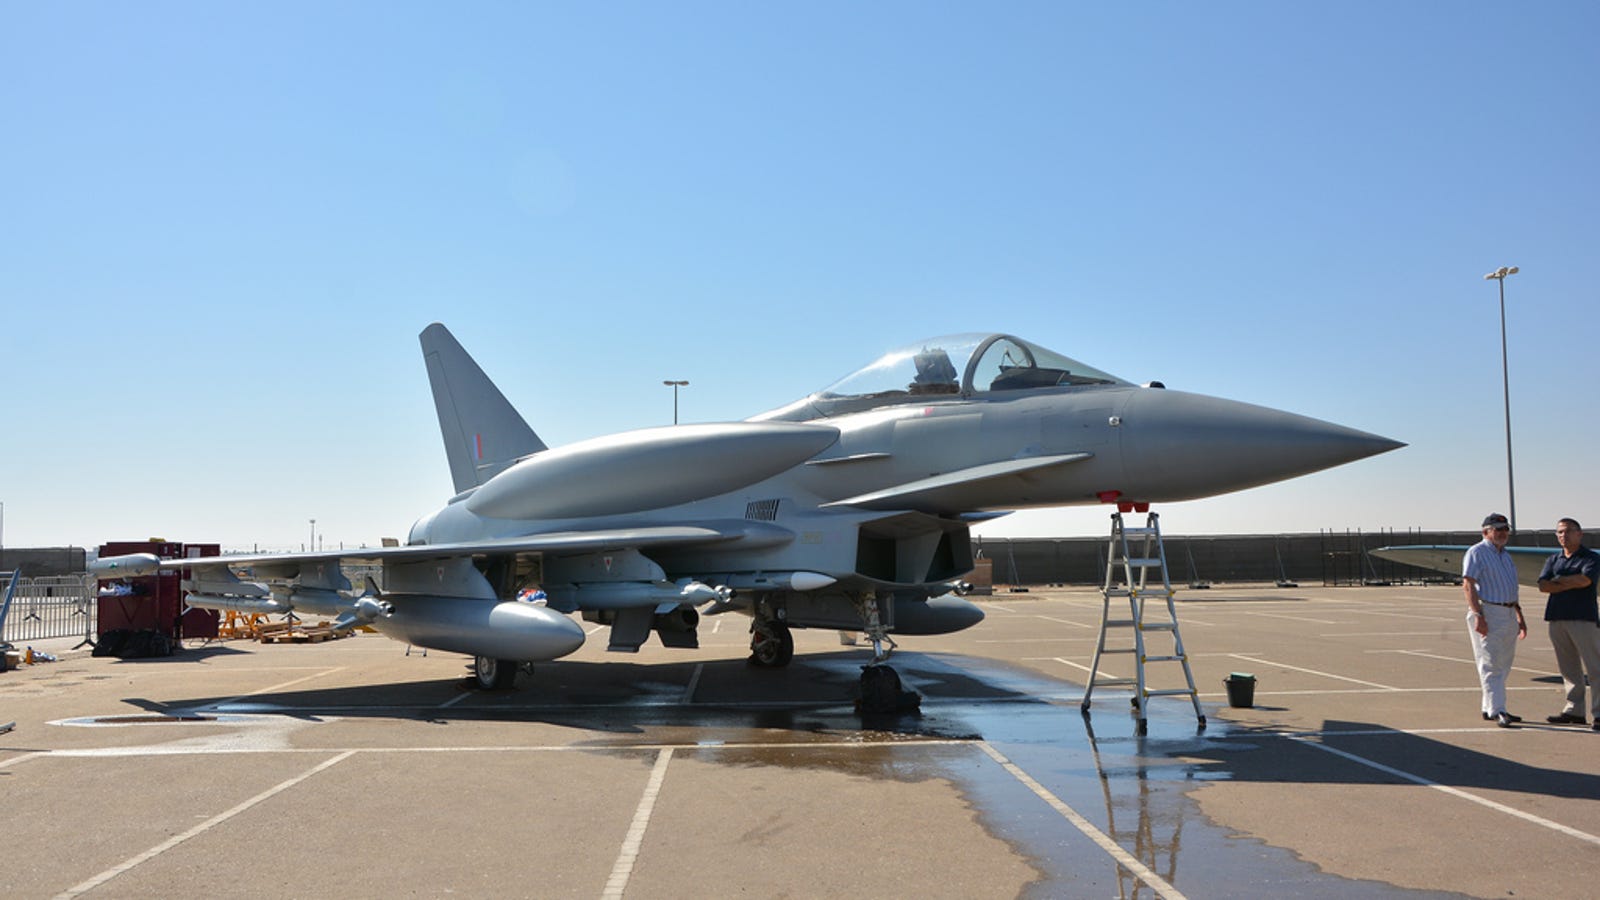 military jets with wing fuel tanks